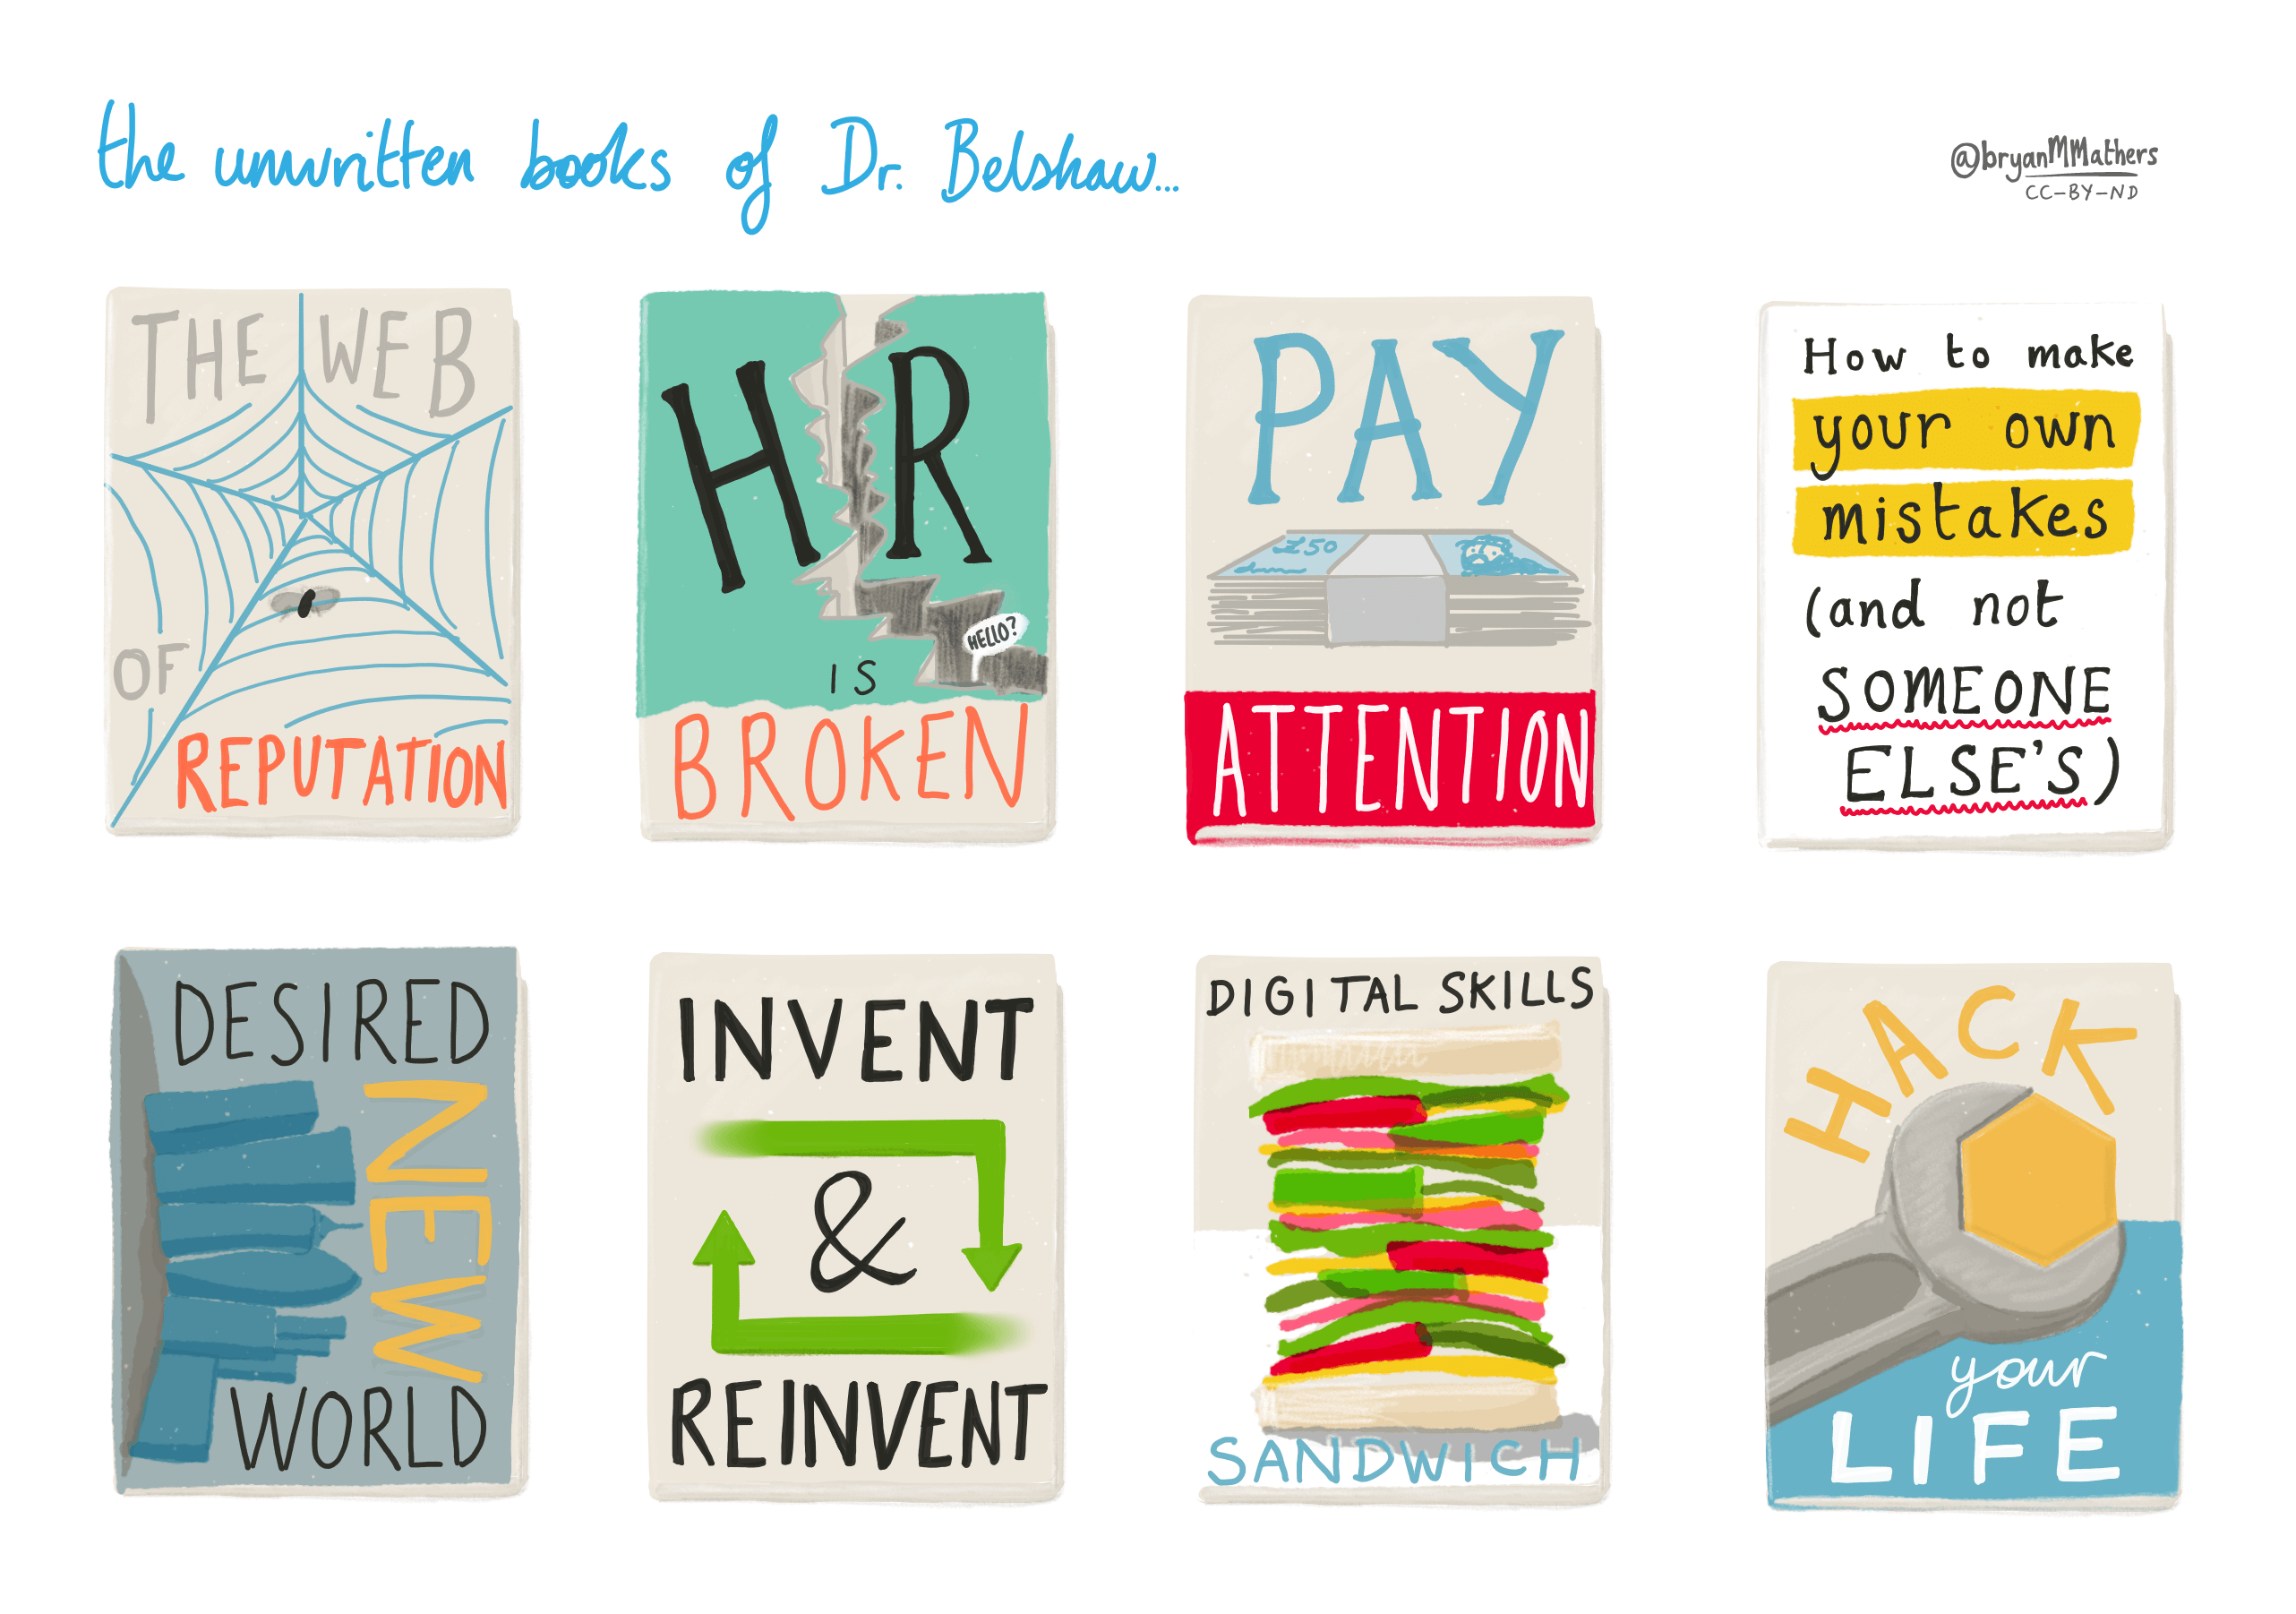 The unwritten books of Dr Belshaw